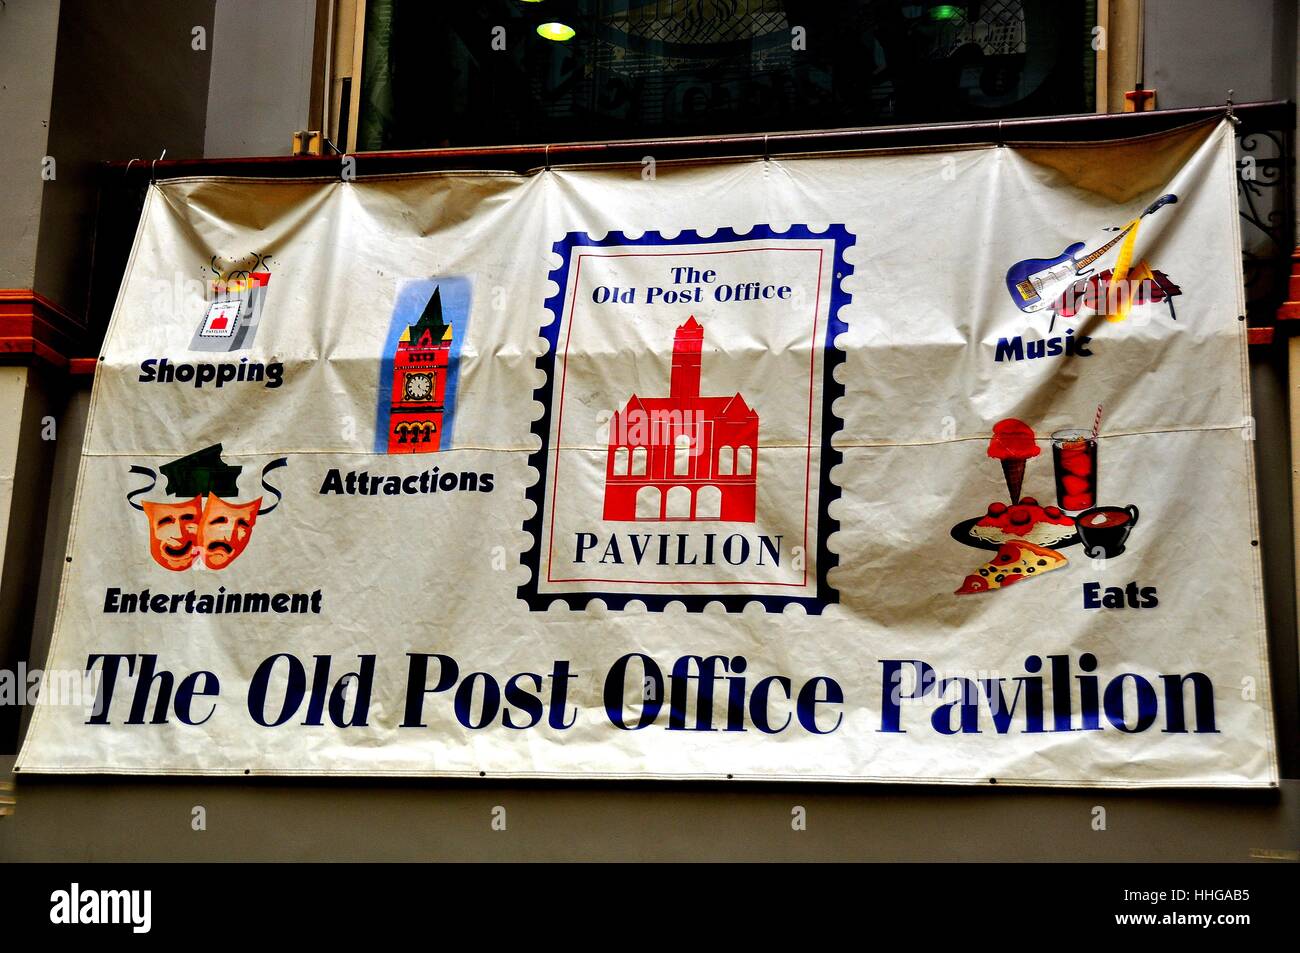 Washington, DC - Aprl 11, 2014:  A banner advertising the attractions at the Nancy Hanks Old Post Office Pavilion, now a brand new Trump Hotel   * Stock Photo